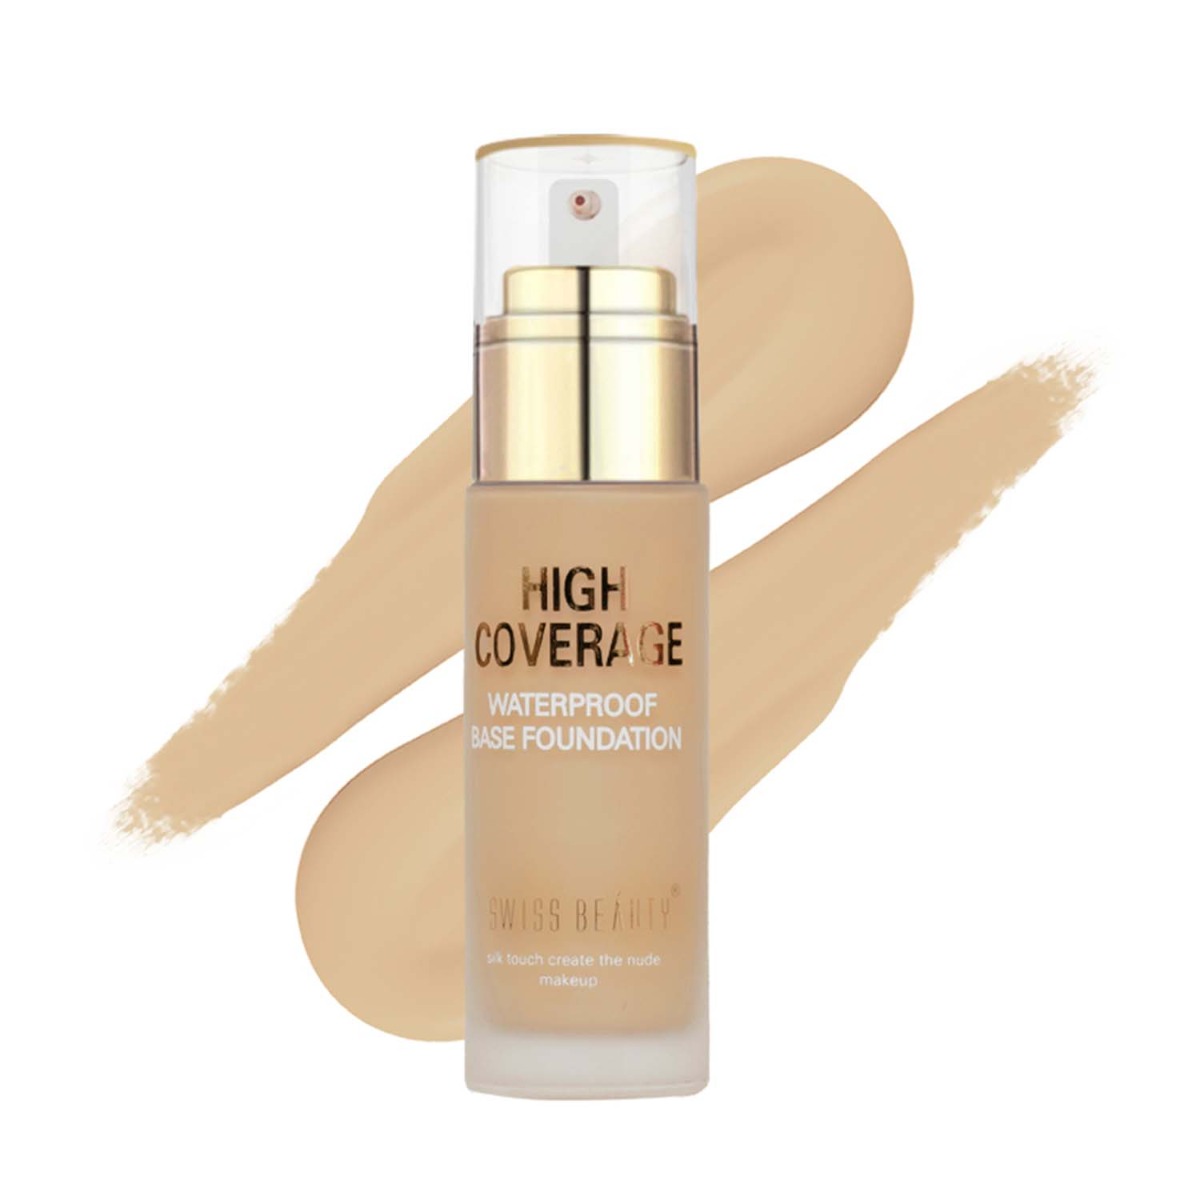 Swiss Beauty High Coverage Waterproof Base Foundation - Natural Nude, 60gm